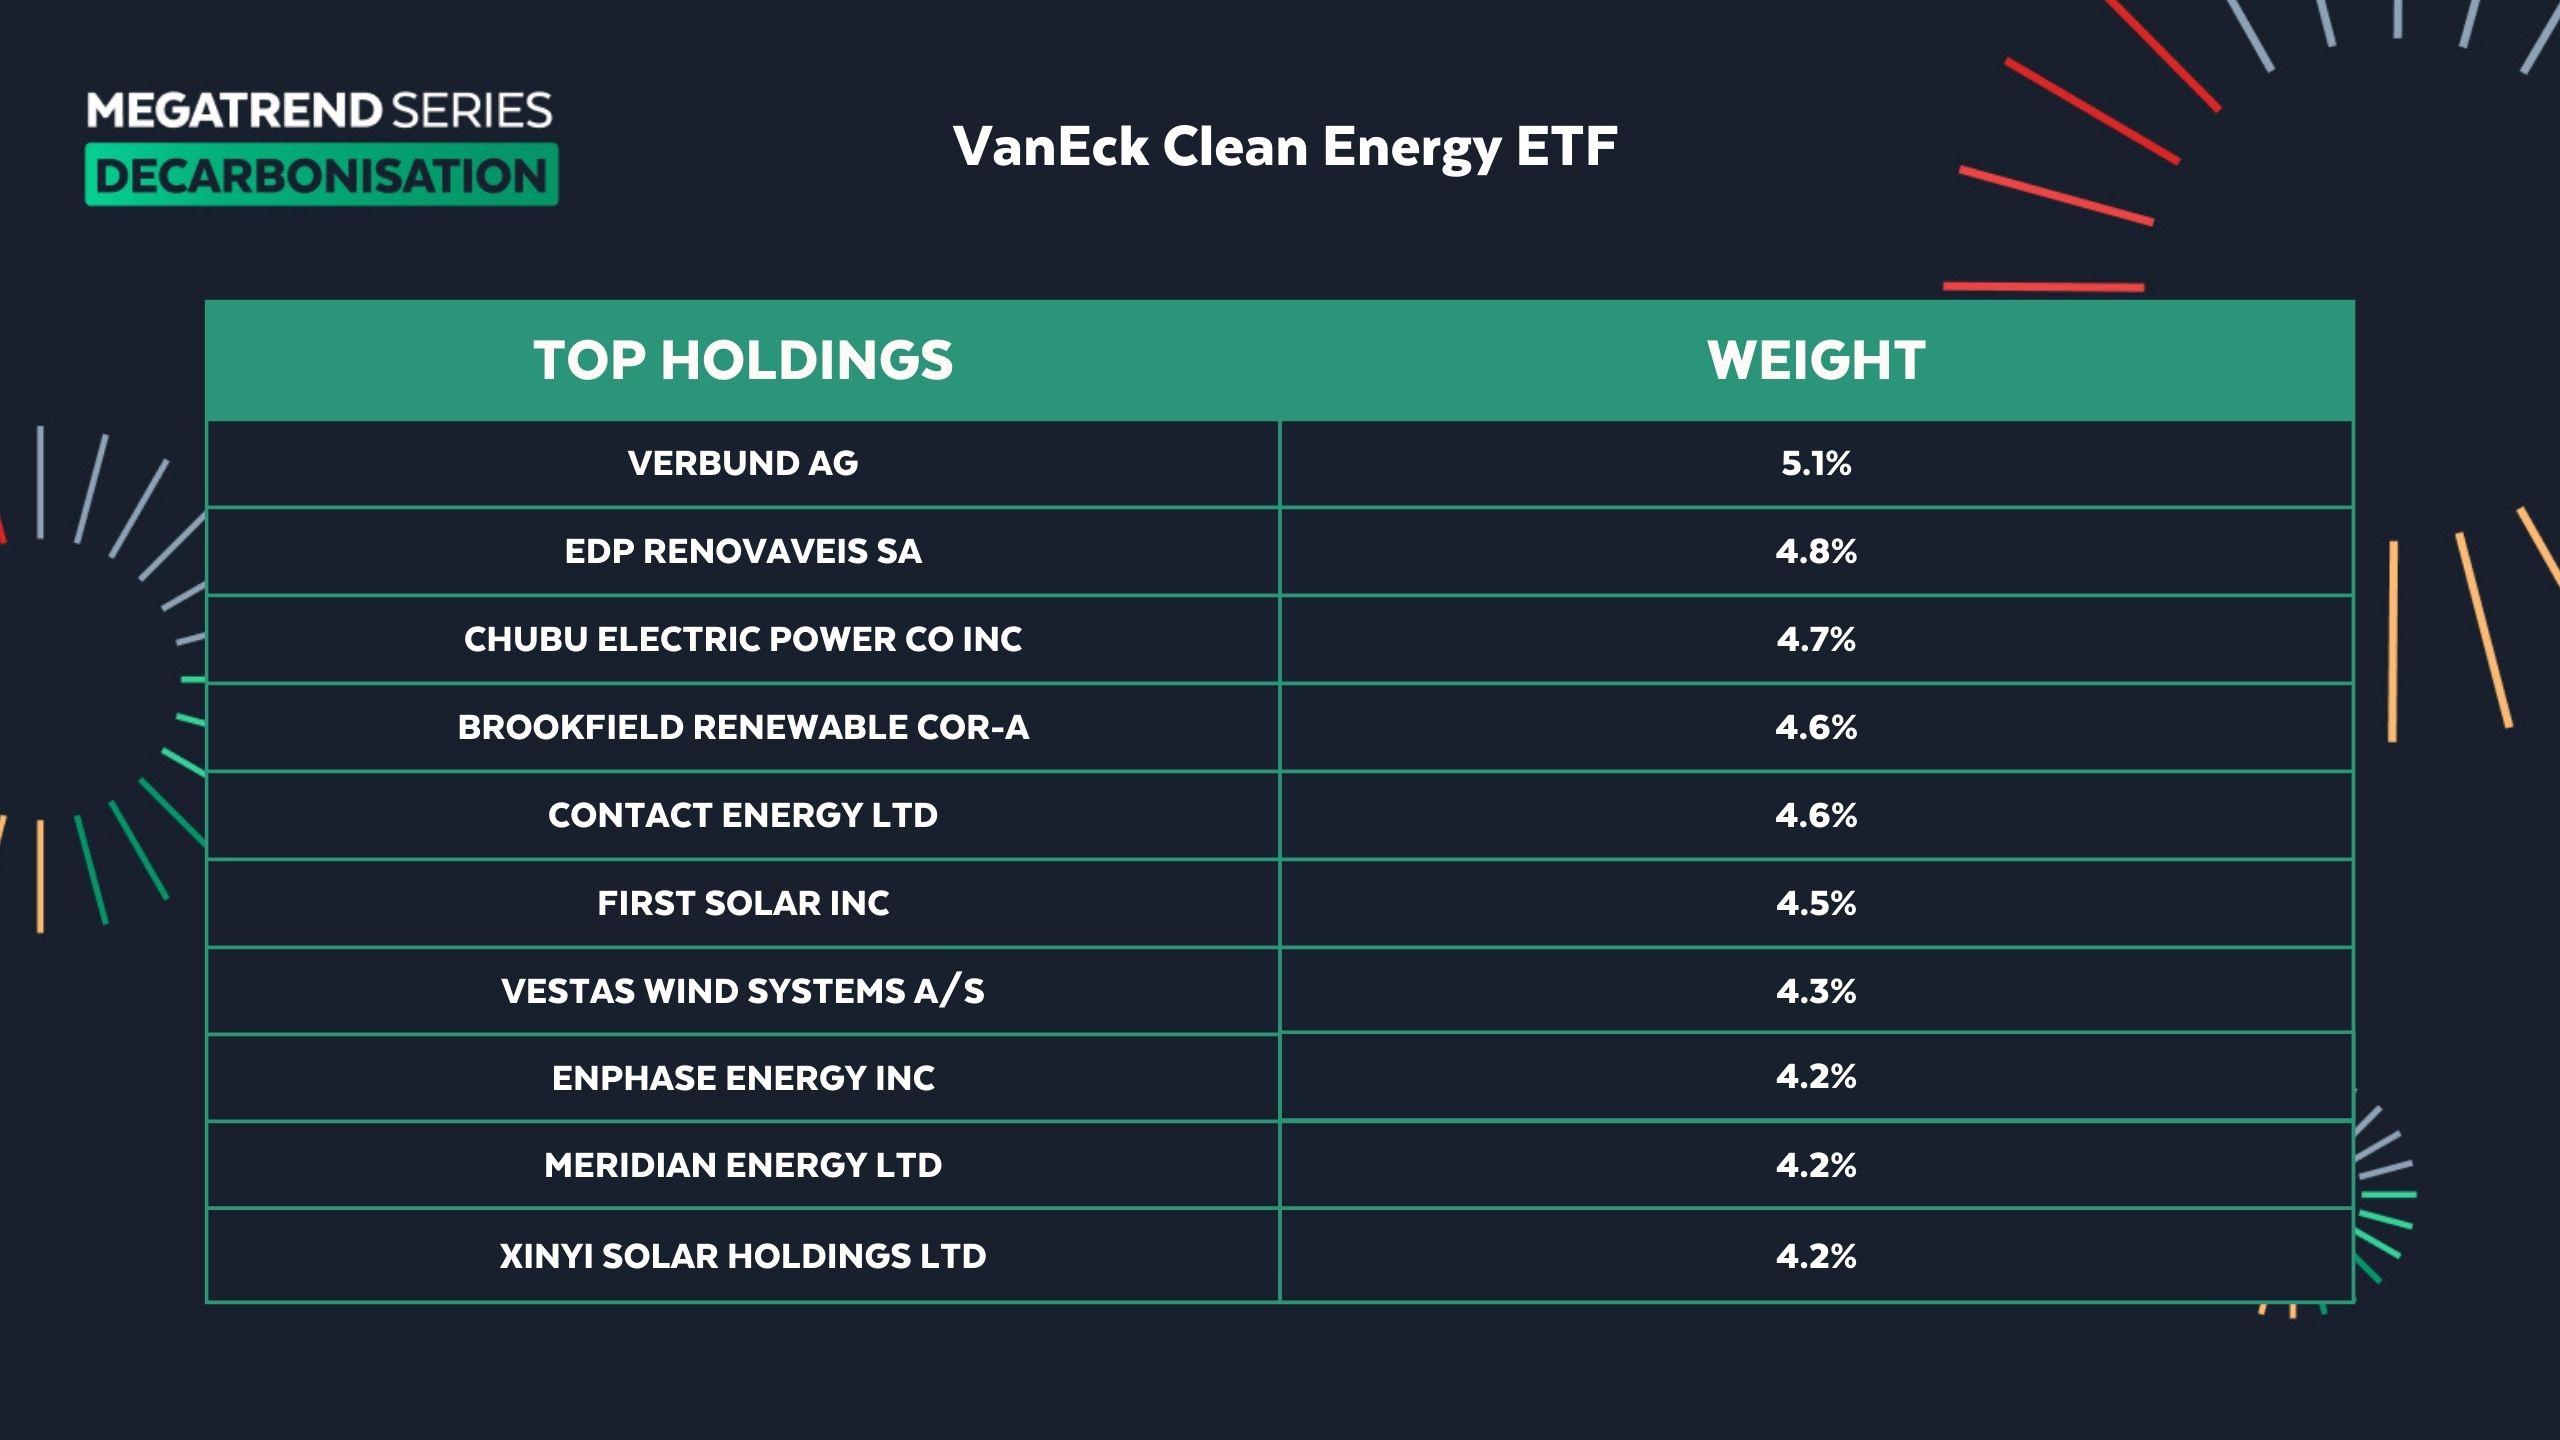 Top 10 holdings and weightings for CLNE. (Source: VanEck)